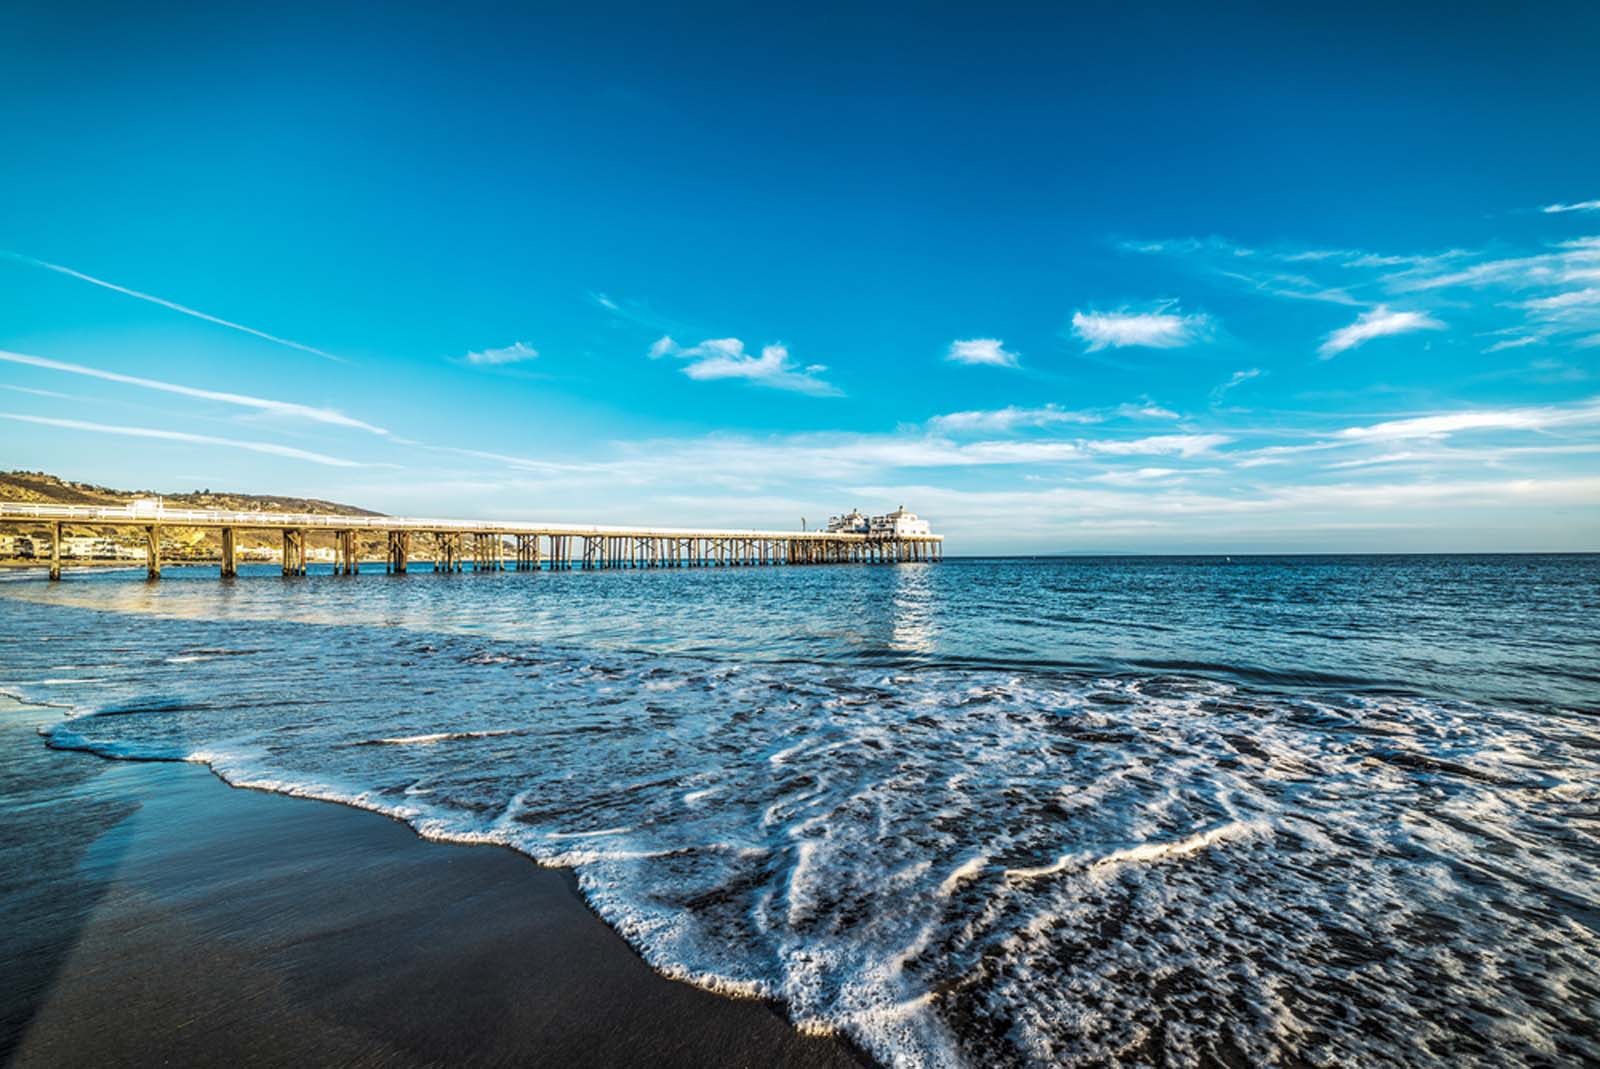 Cool things to do in Malibu